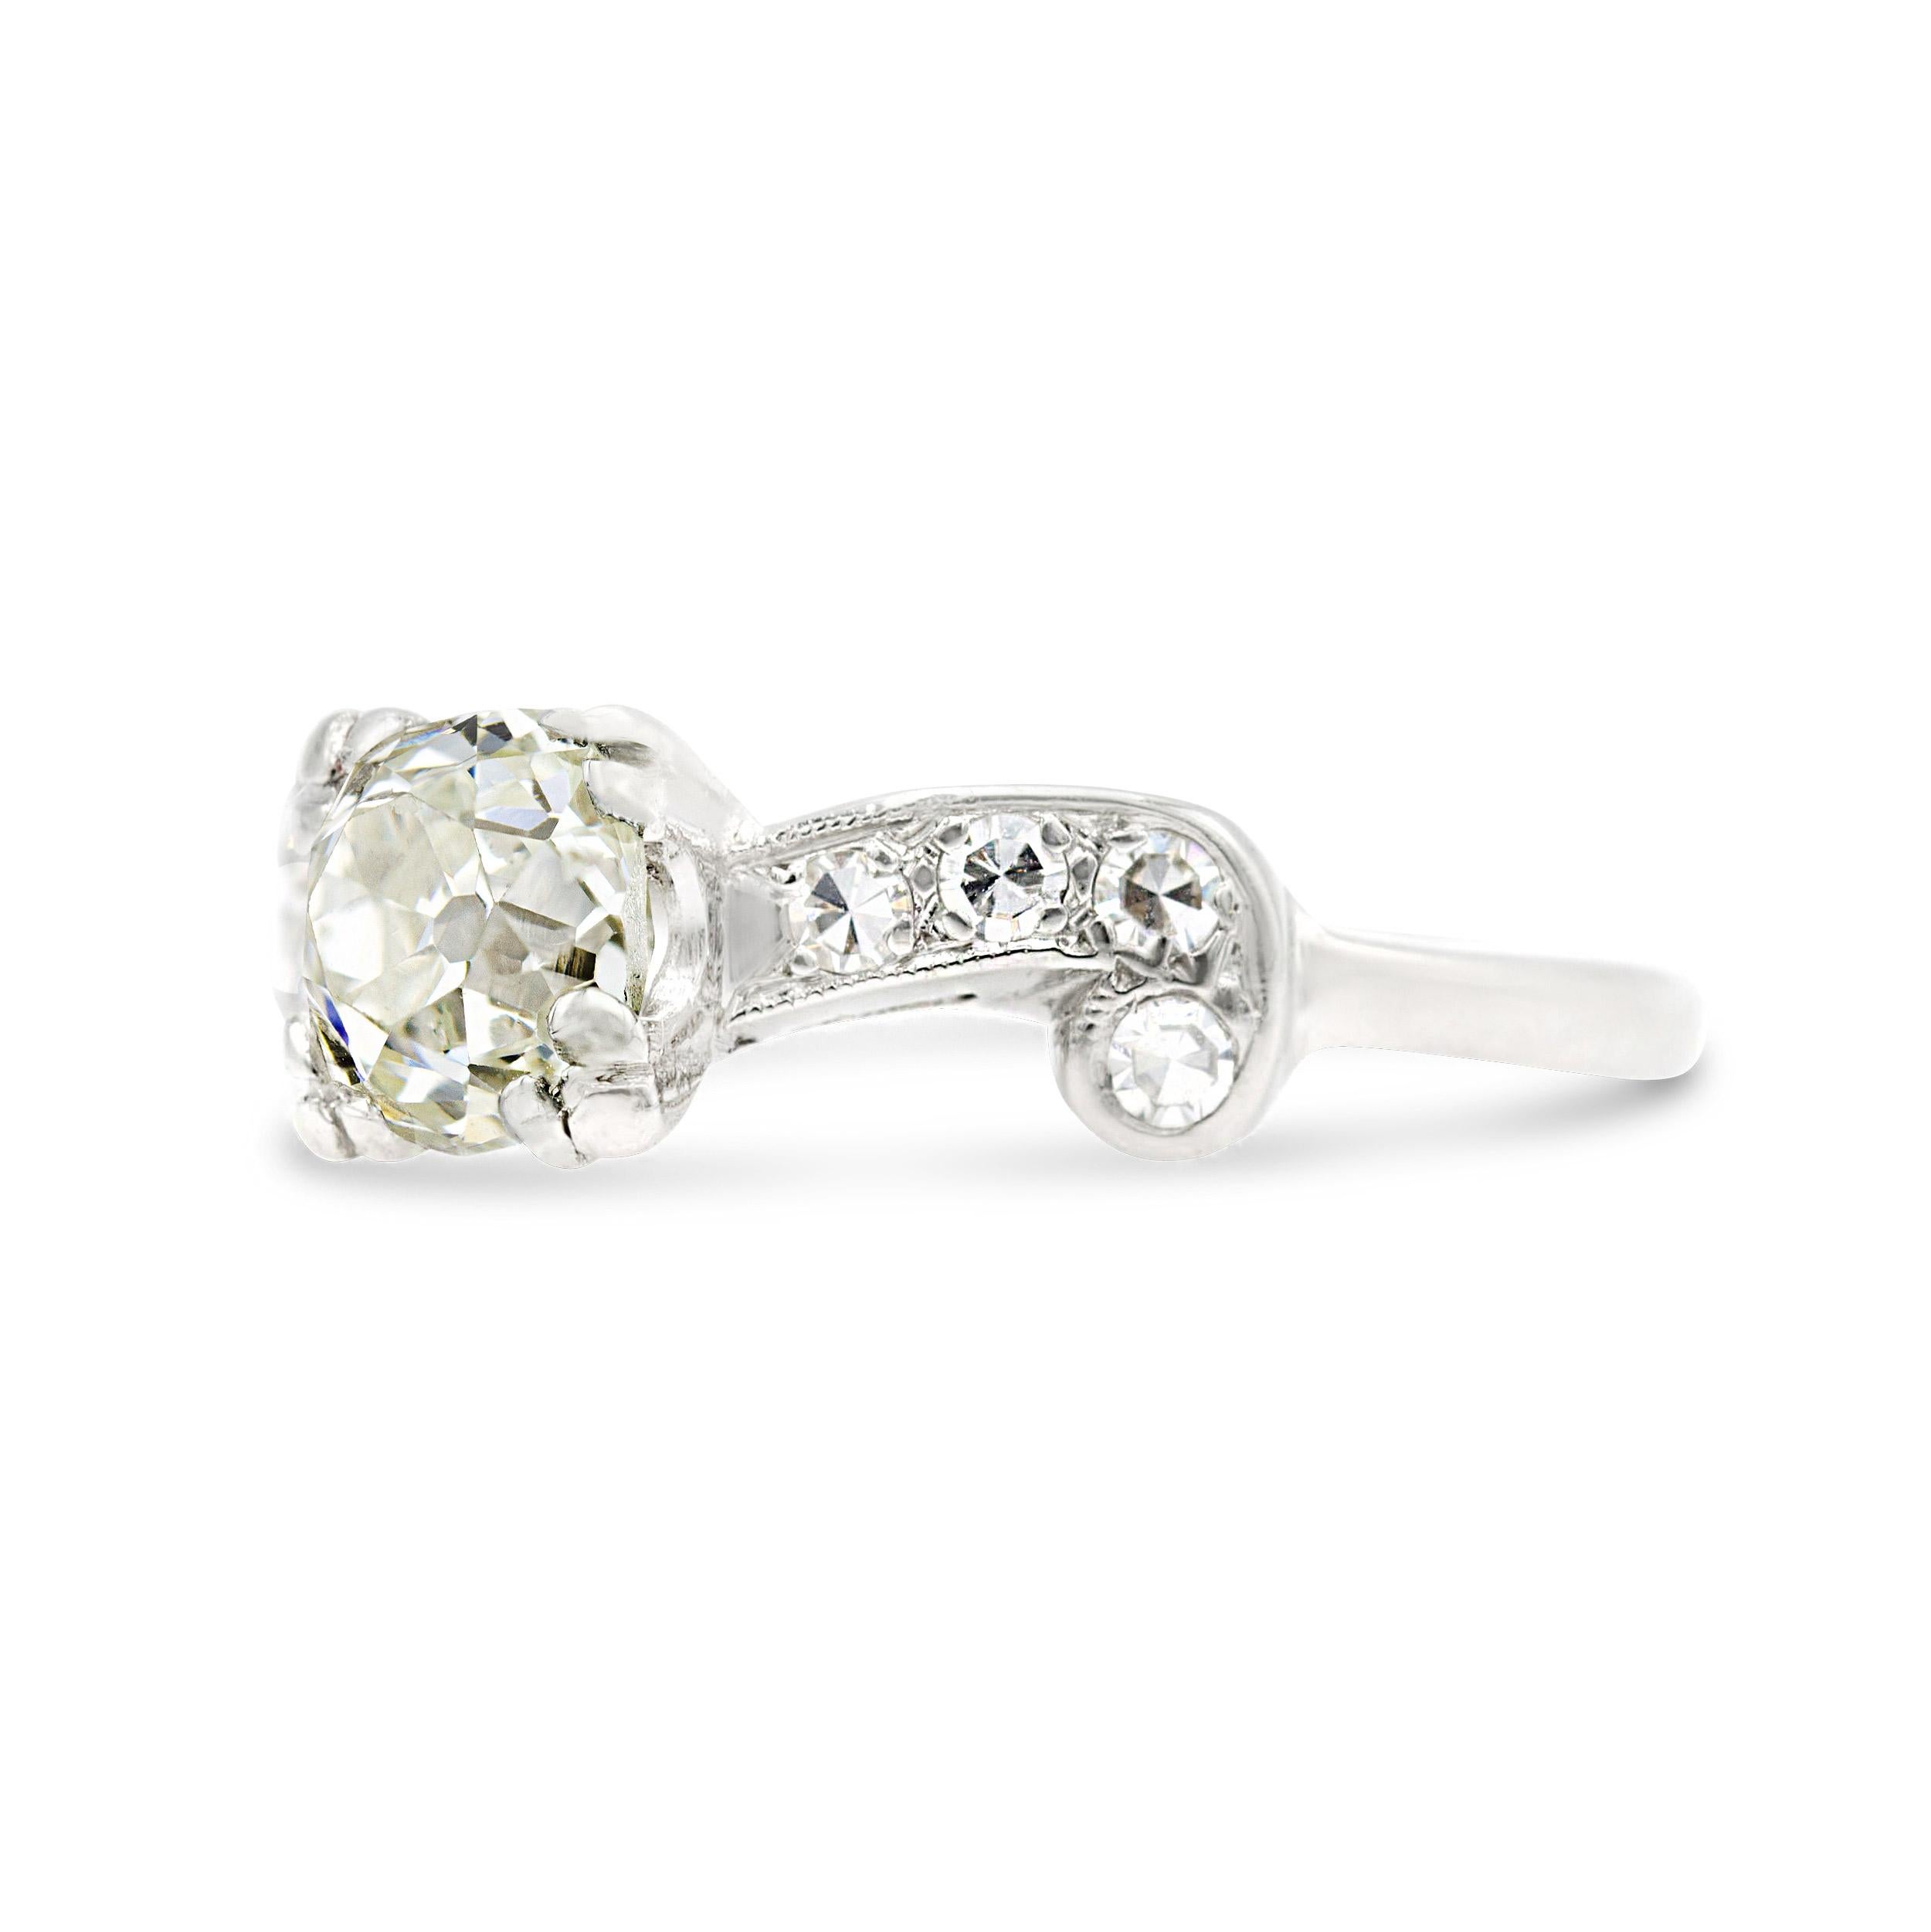 Slip this dazzling diamond engagement ring on your finger and put on the glitz. Taking center stage is a bright and colorless 1.13 carat rectangular old mine diamond. The distinguished center stone is complemented by 8 single cut diamonds twinkling